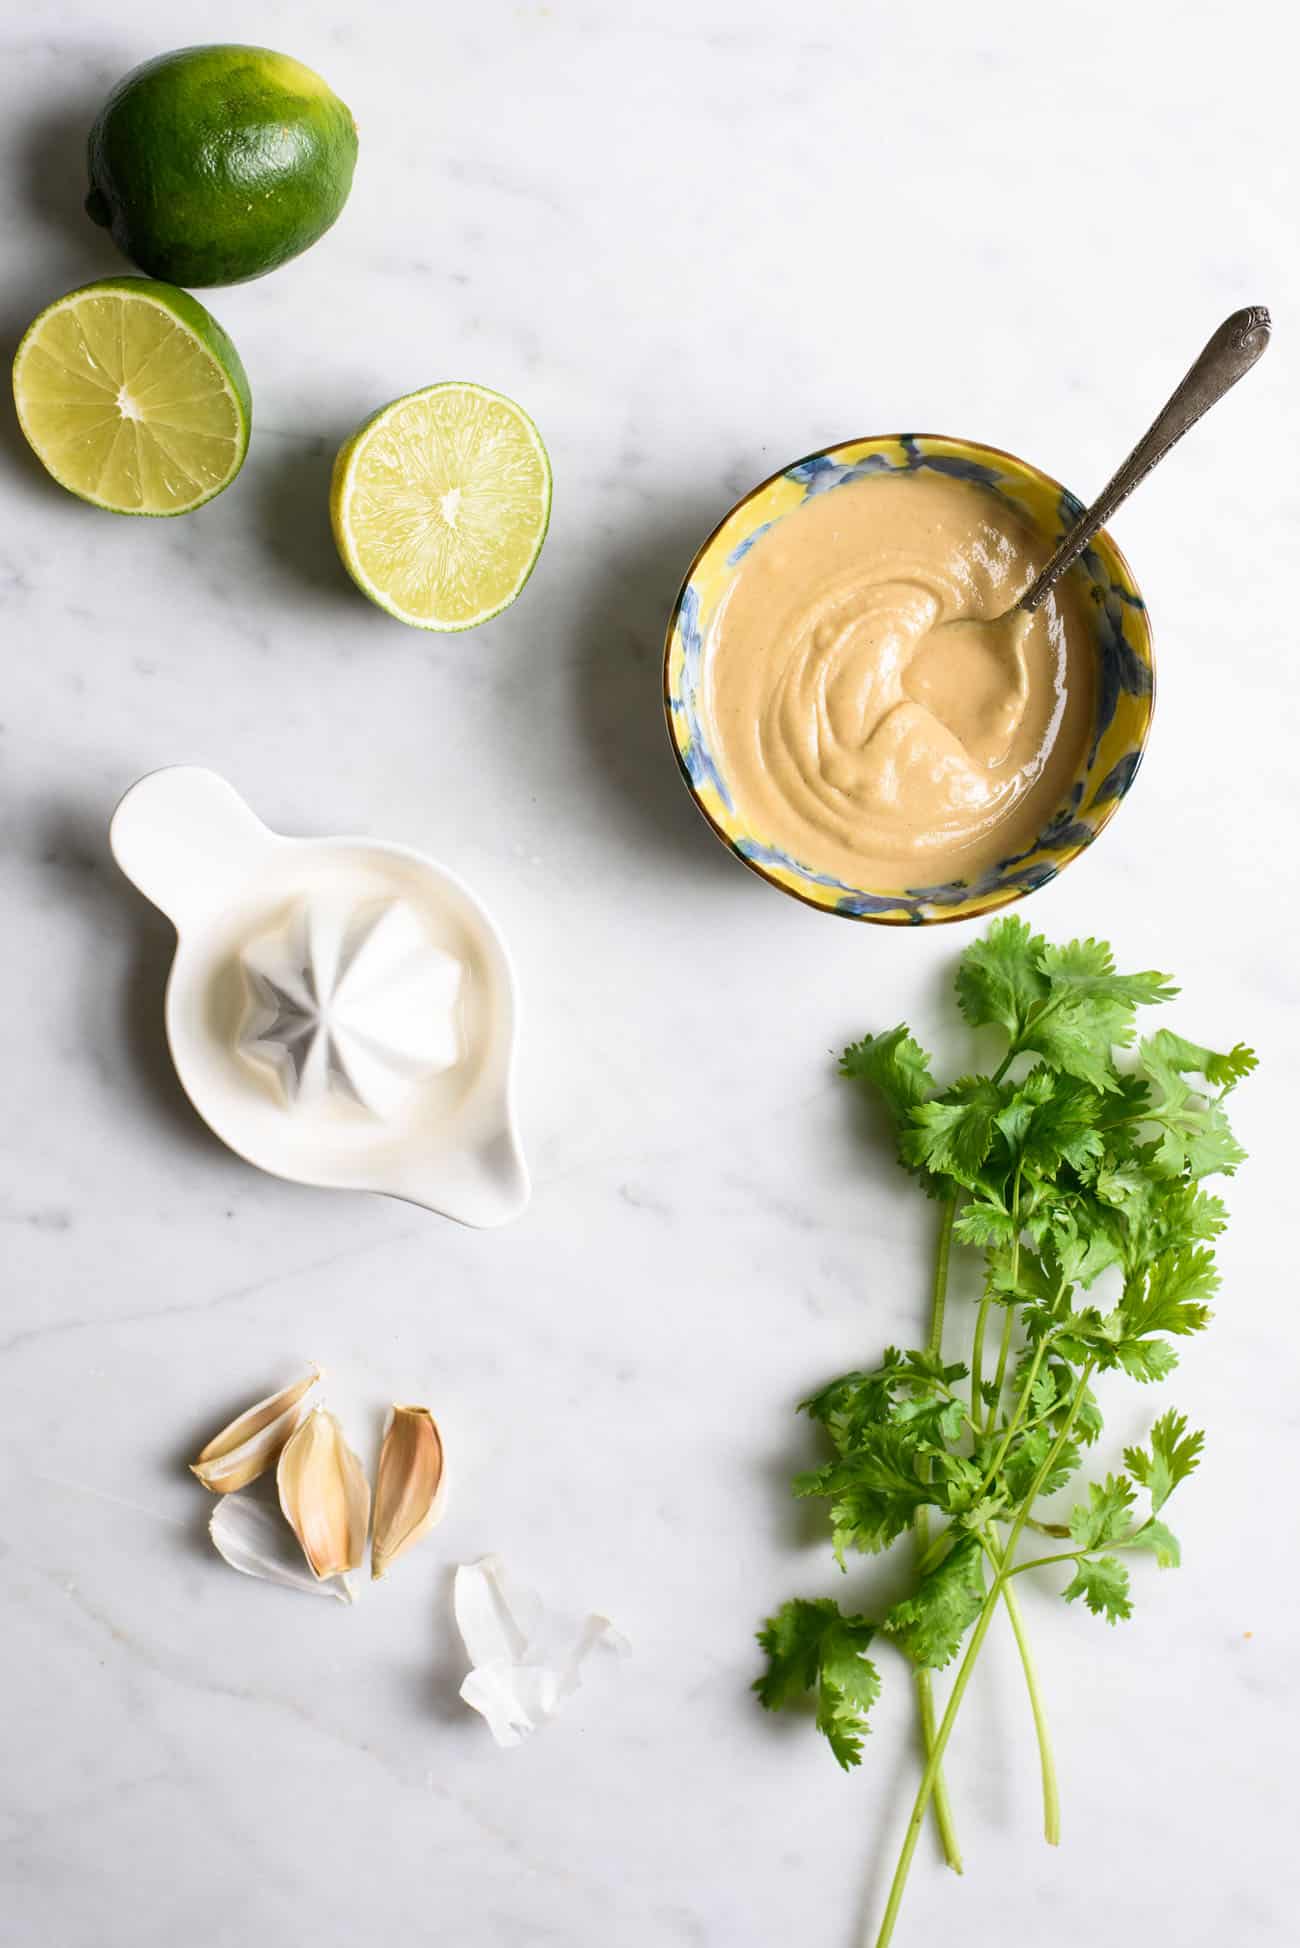 Limes, garlic, tahini and cilantro on a marble table